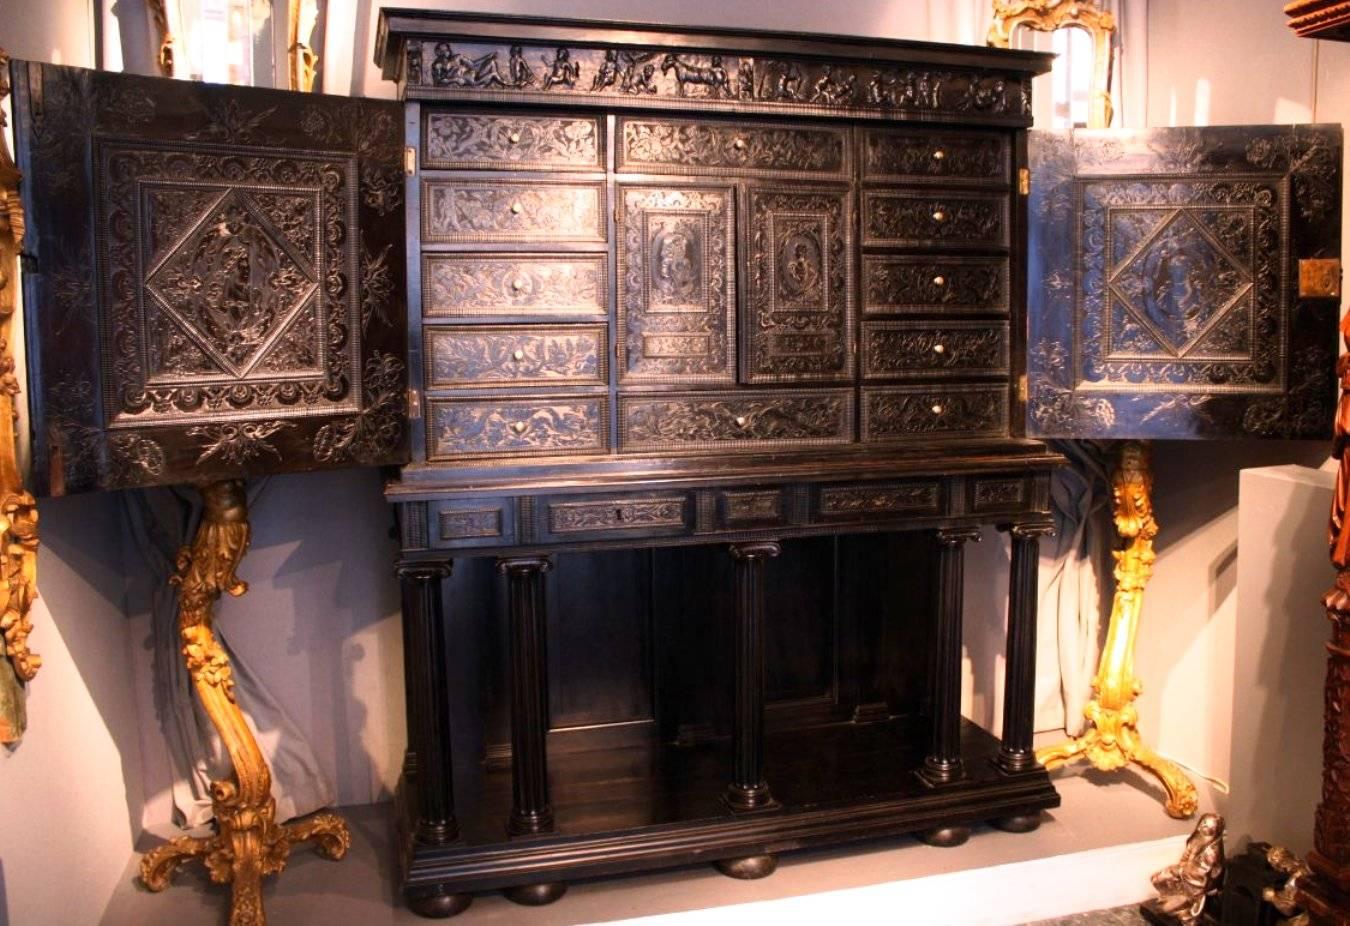 A fabulous 17th century carved ebony cabinet on stand, Paris, France, circa 1640, Louis XIII period.
This cabinet opens by two doors revealing twelve drawers and two small doors. Doors carvings depict: 